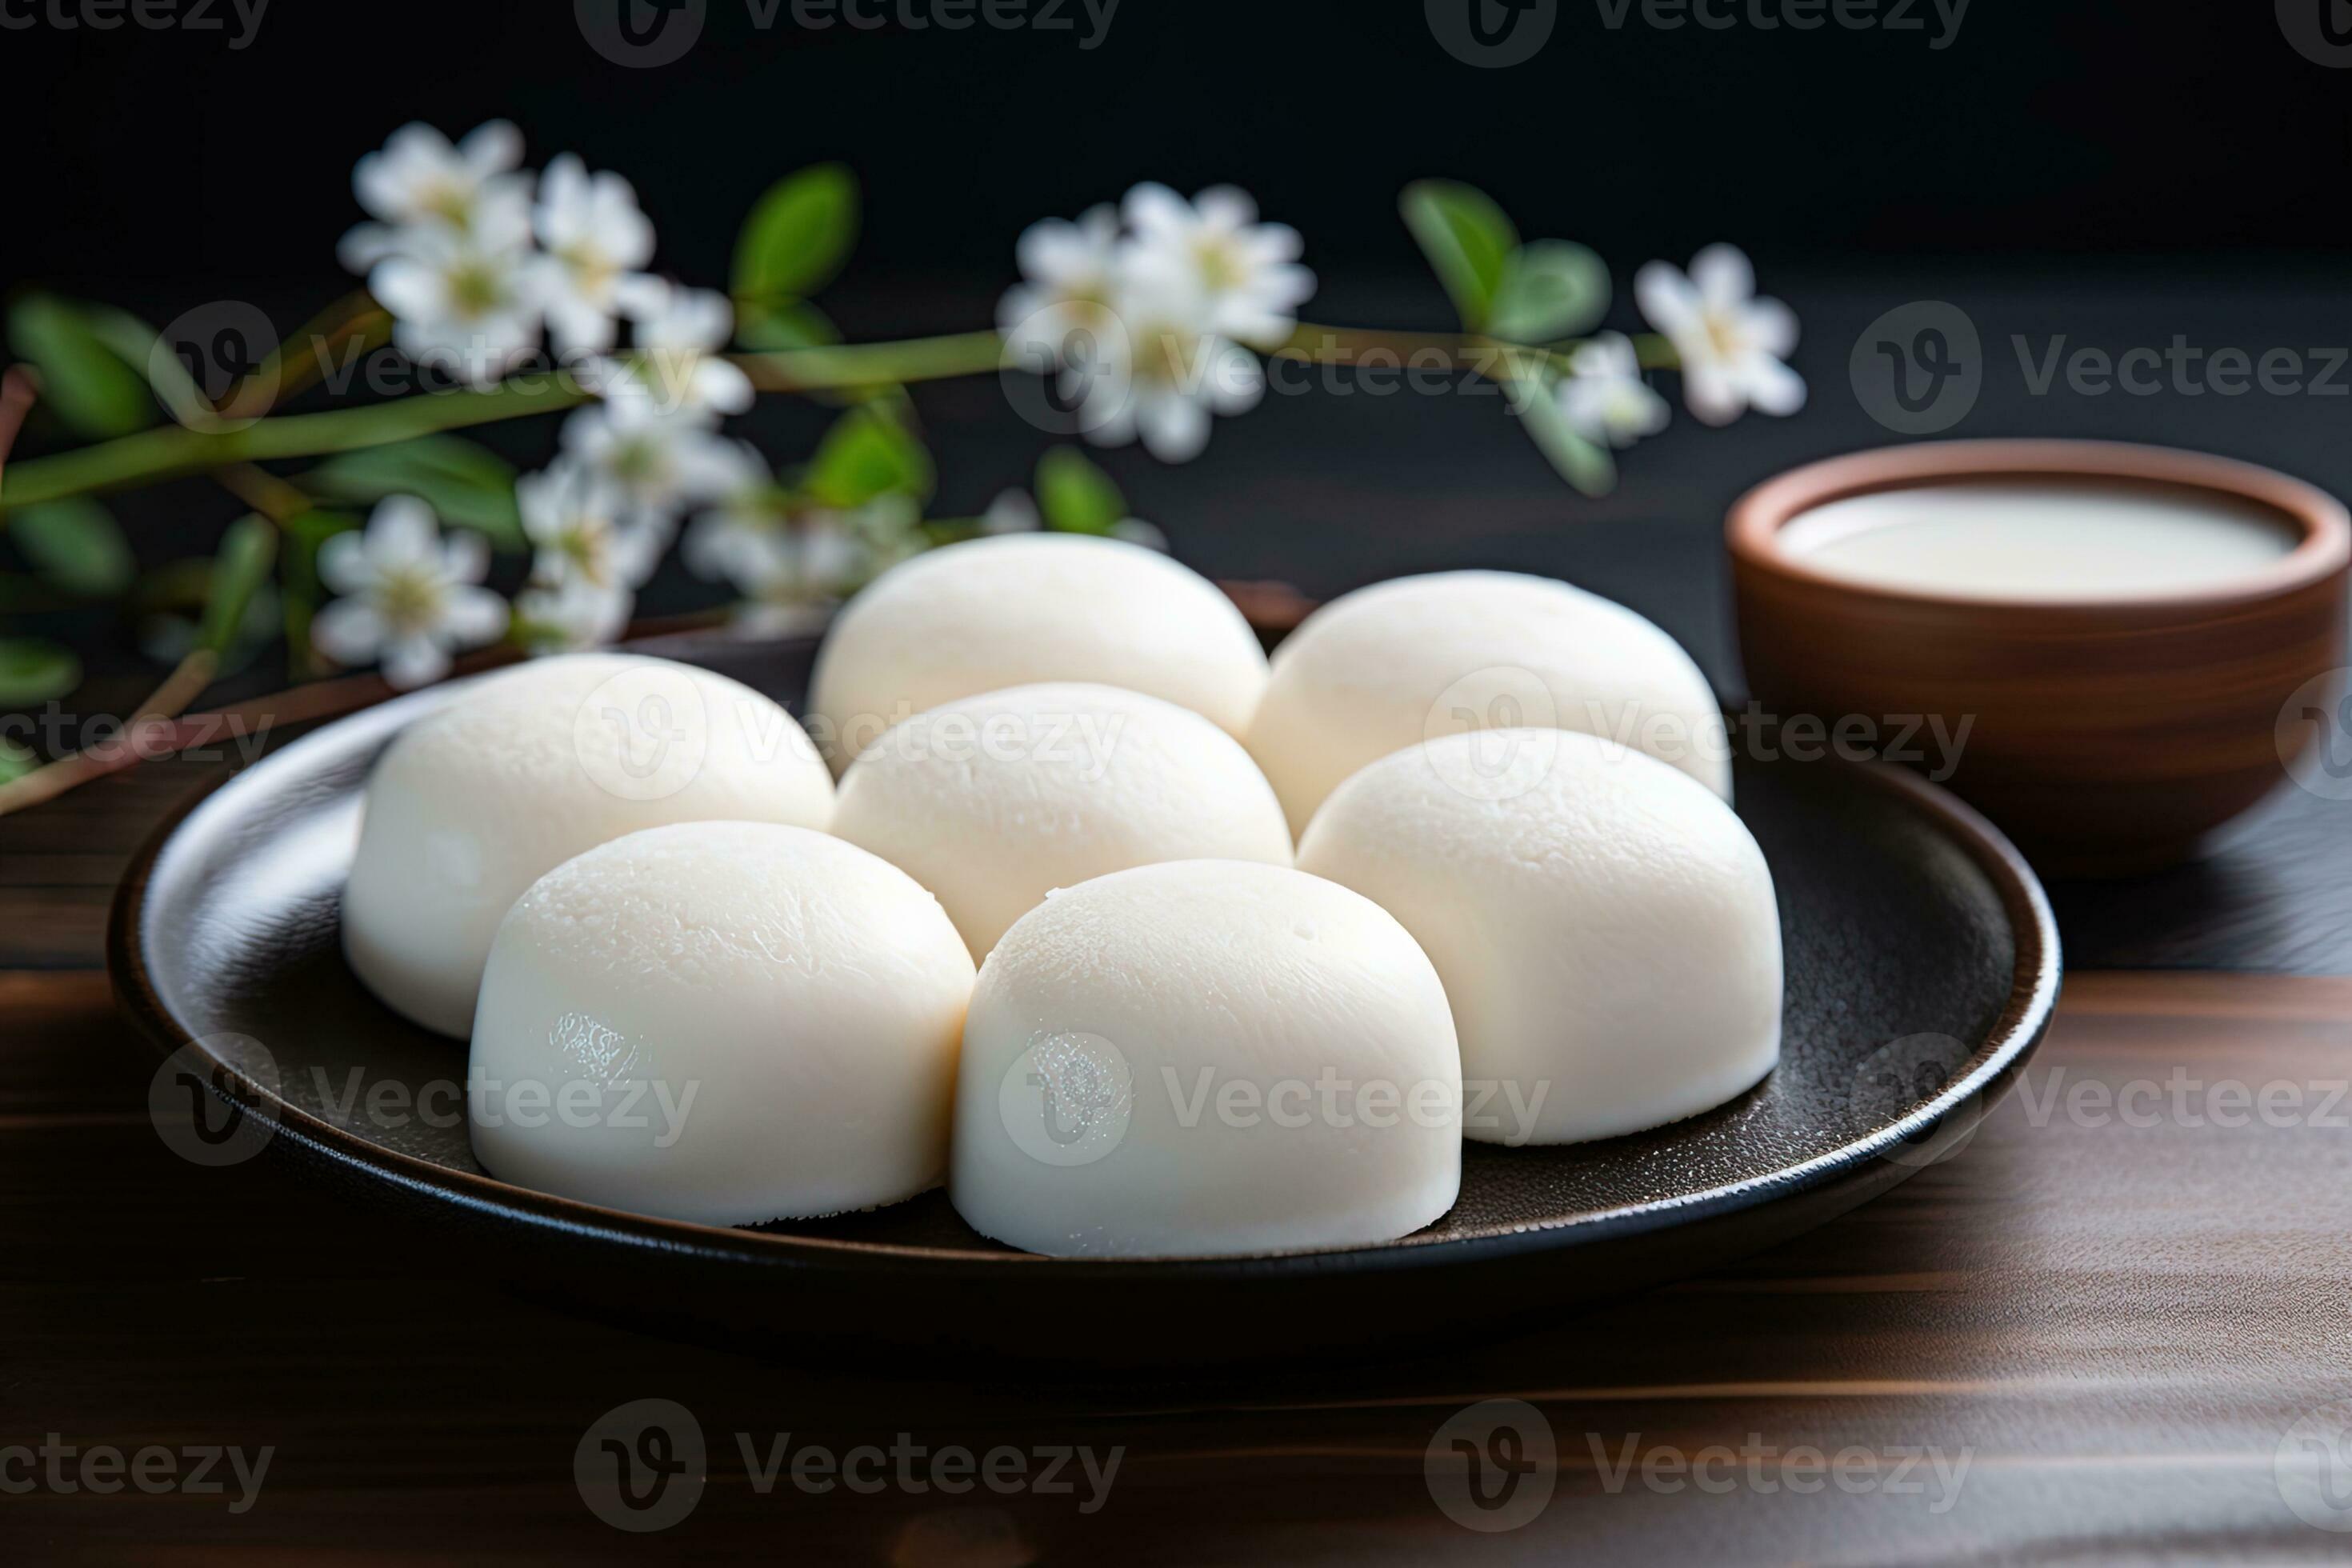 Mochi dolce giapponese